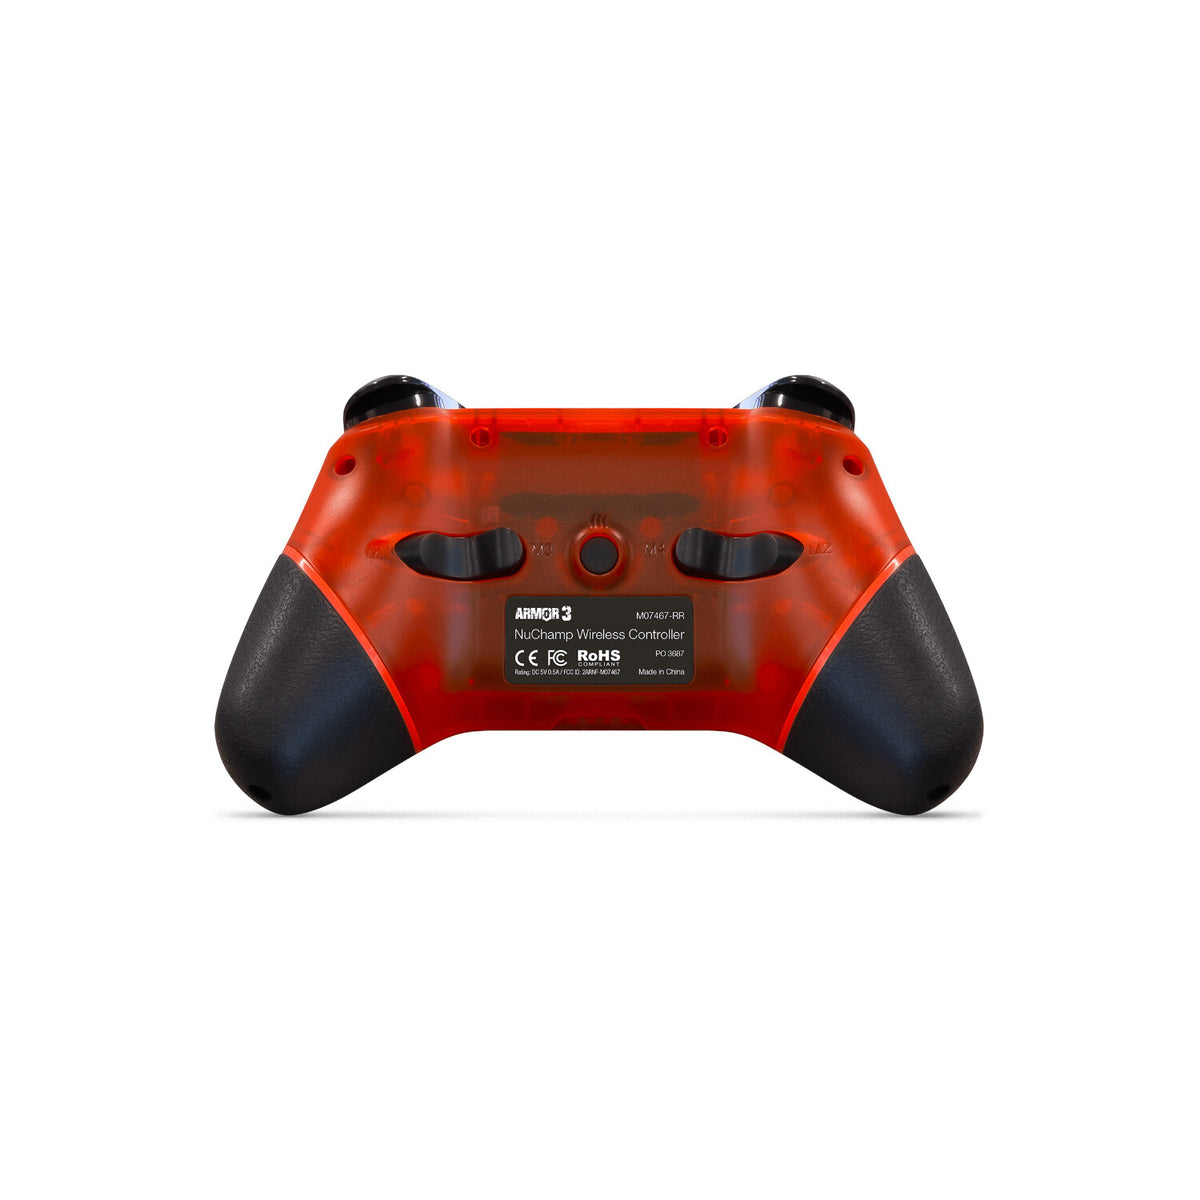 Hyperkin NuChamp - Wireless Gaming Controller for Nintendo Switch in Red